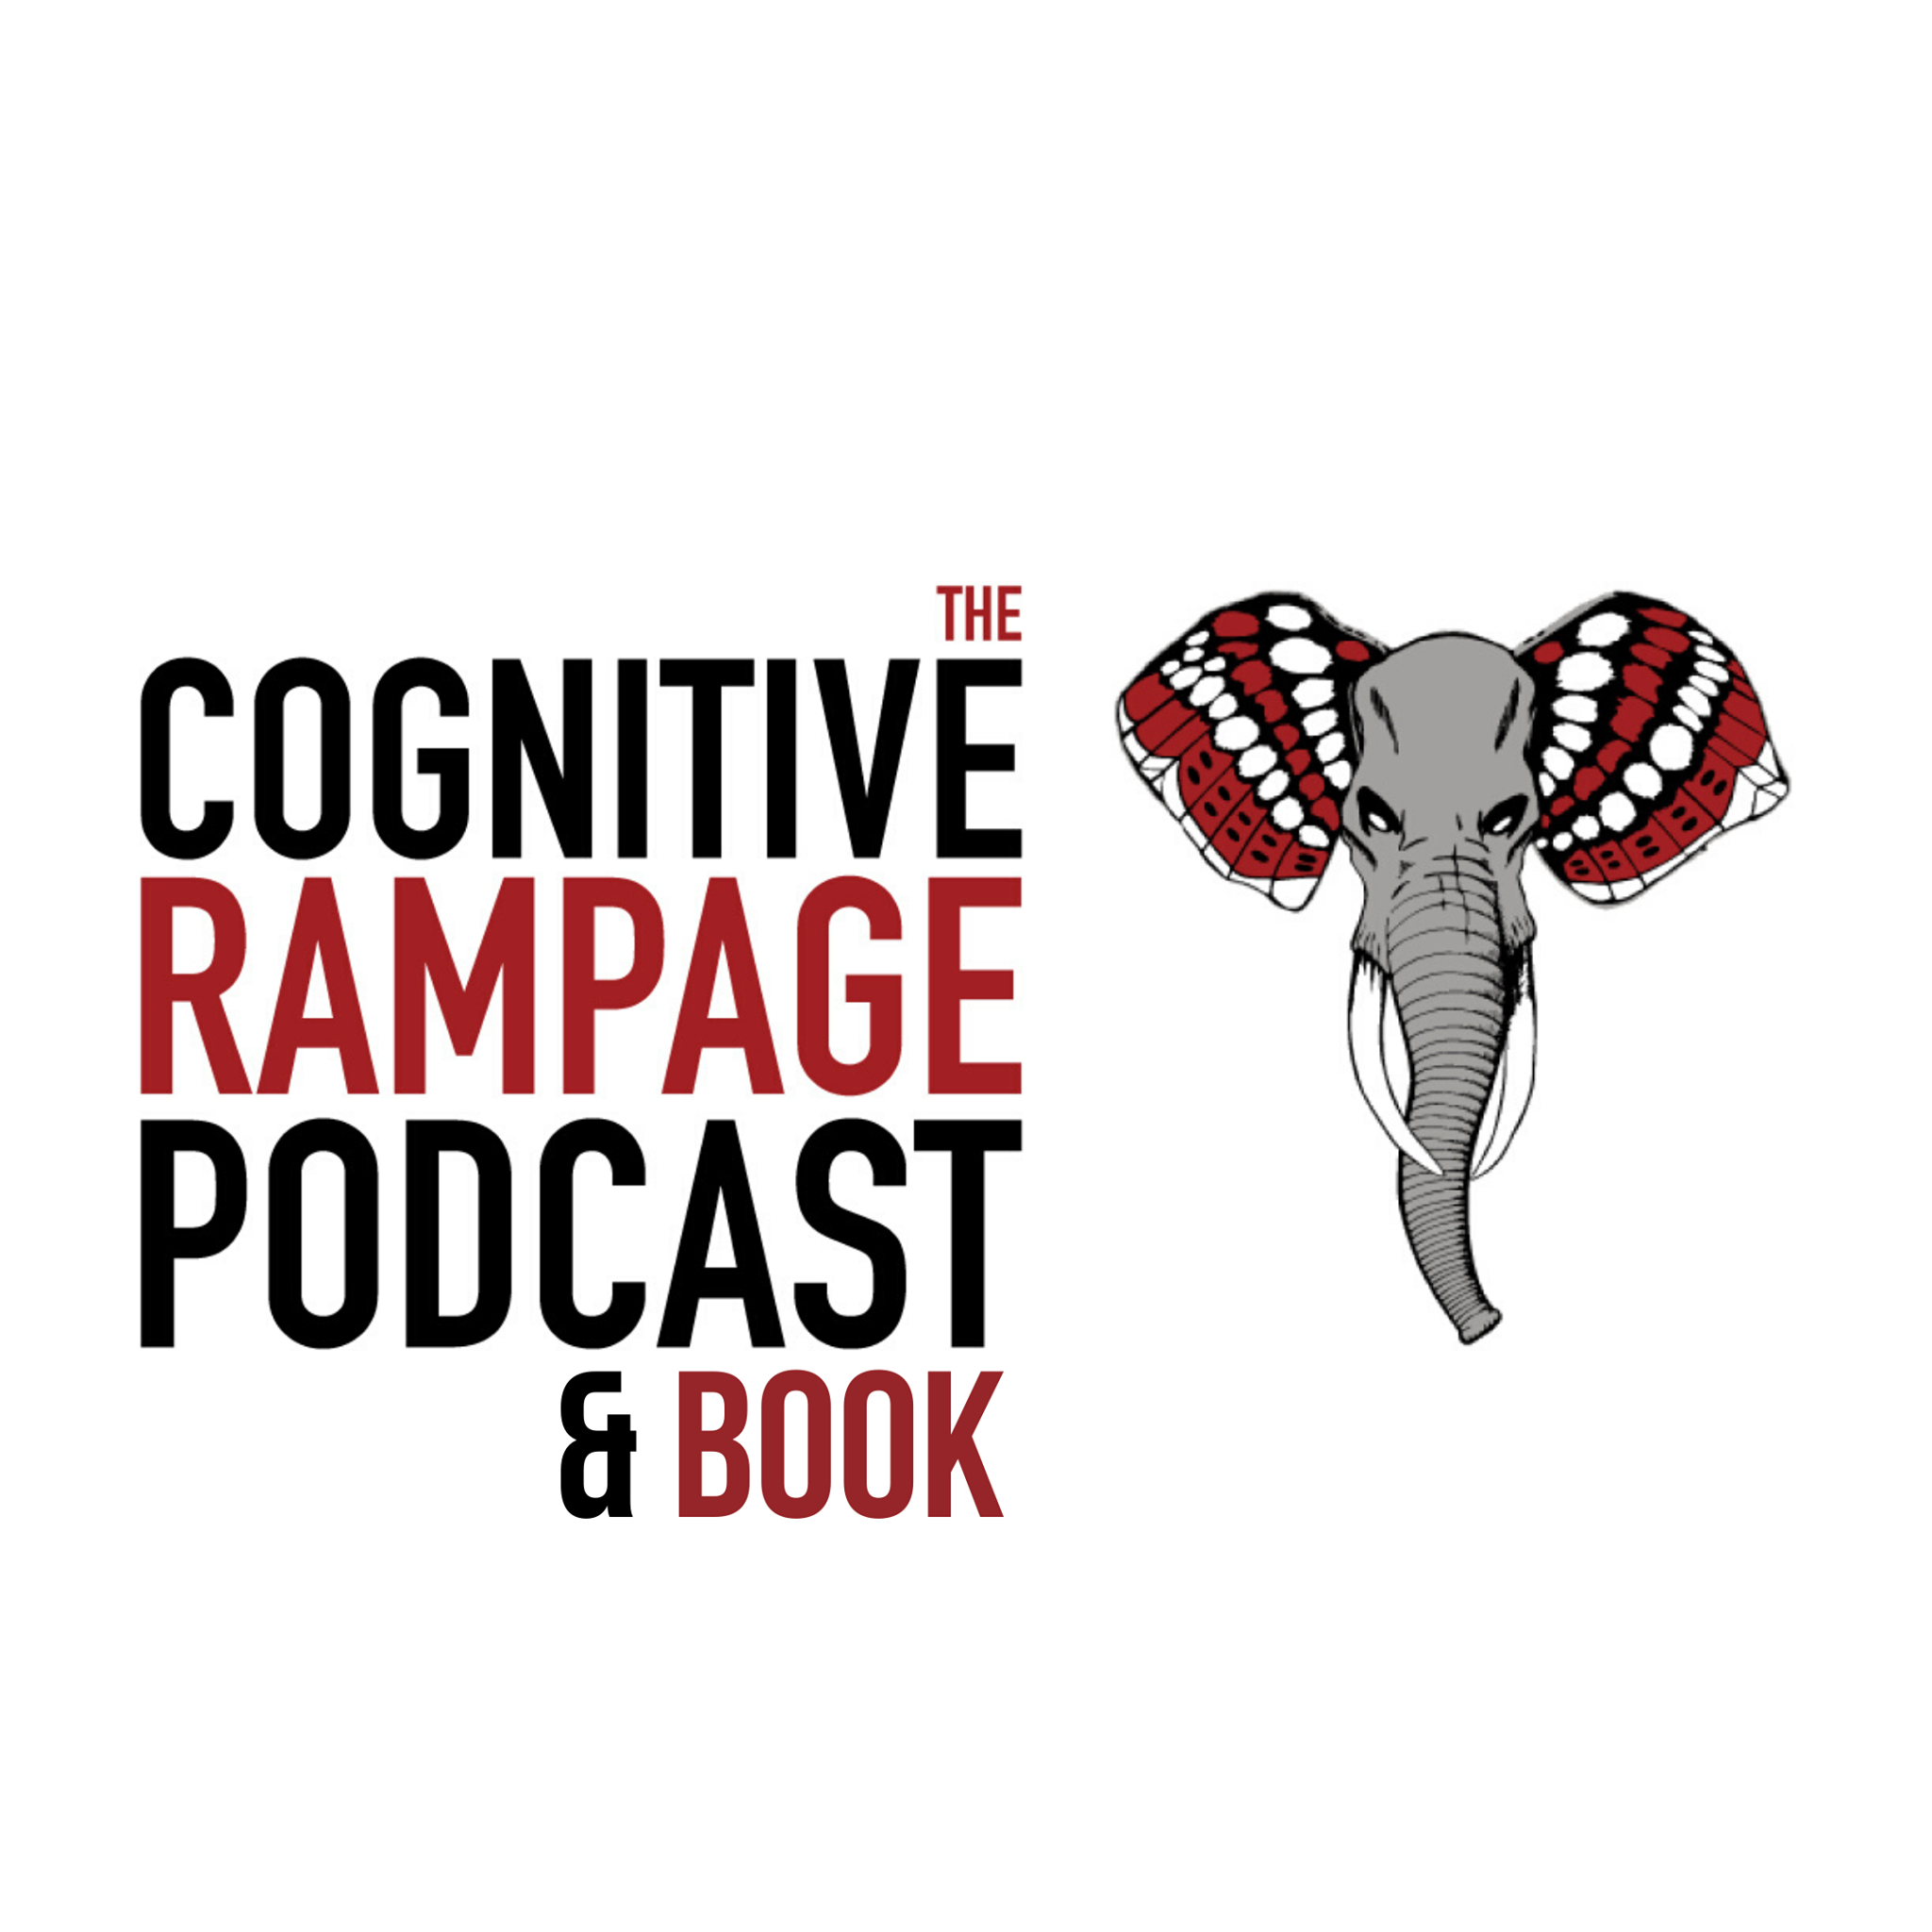 THE COGNITIVE RAMPAGE